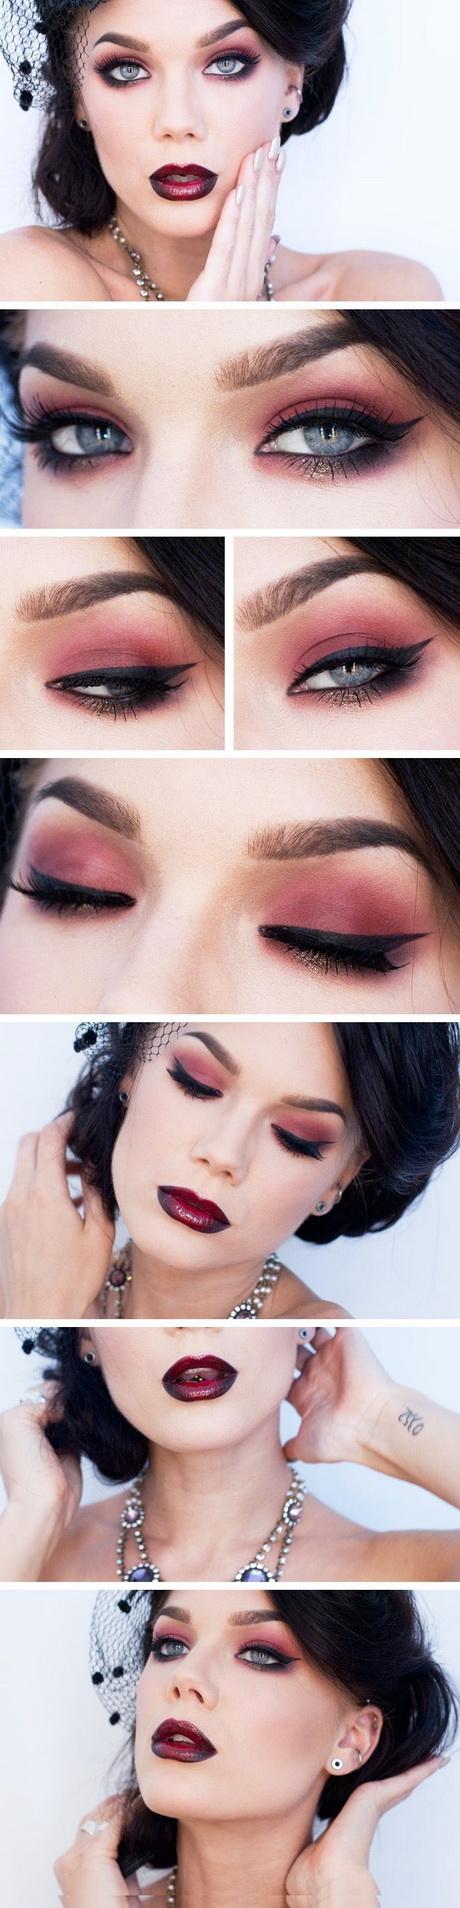 moulin-rouge-makeup-step-by-step-74_9 Moulin rouge make-up stap voor stap